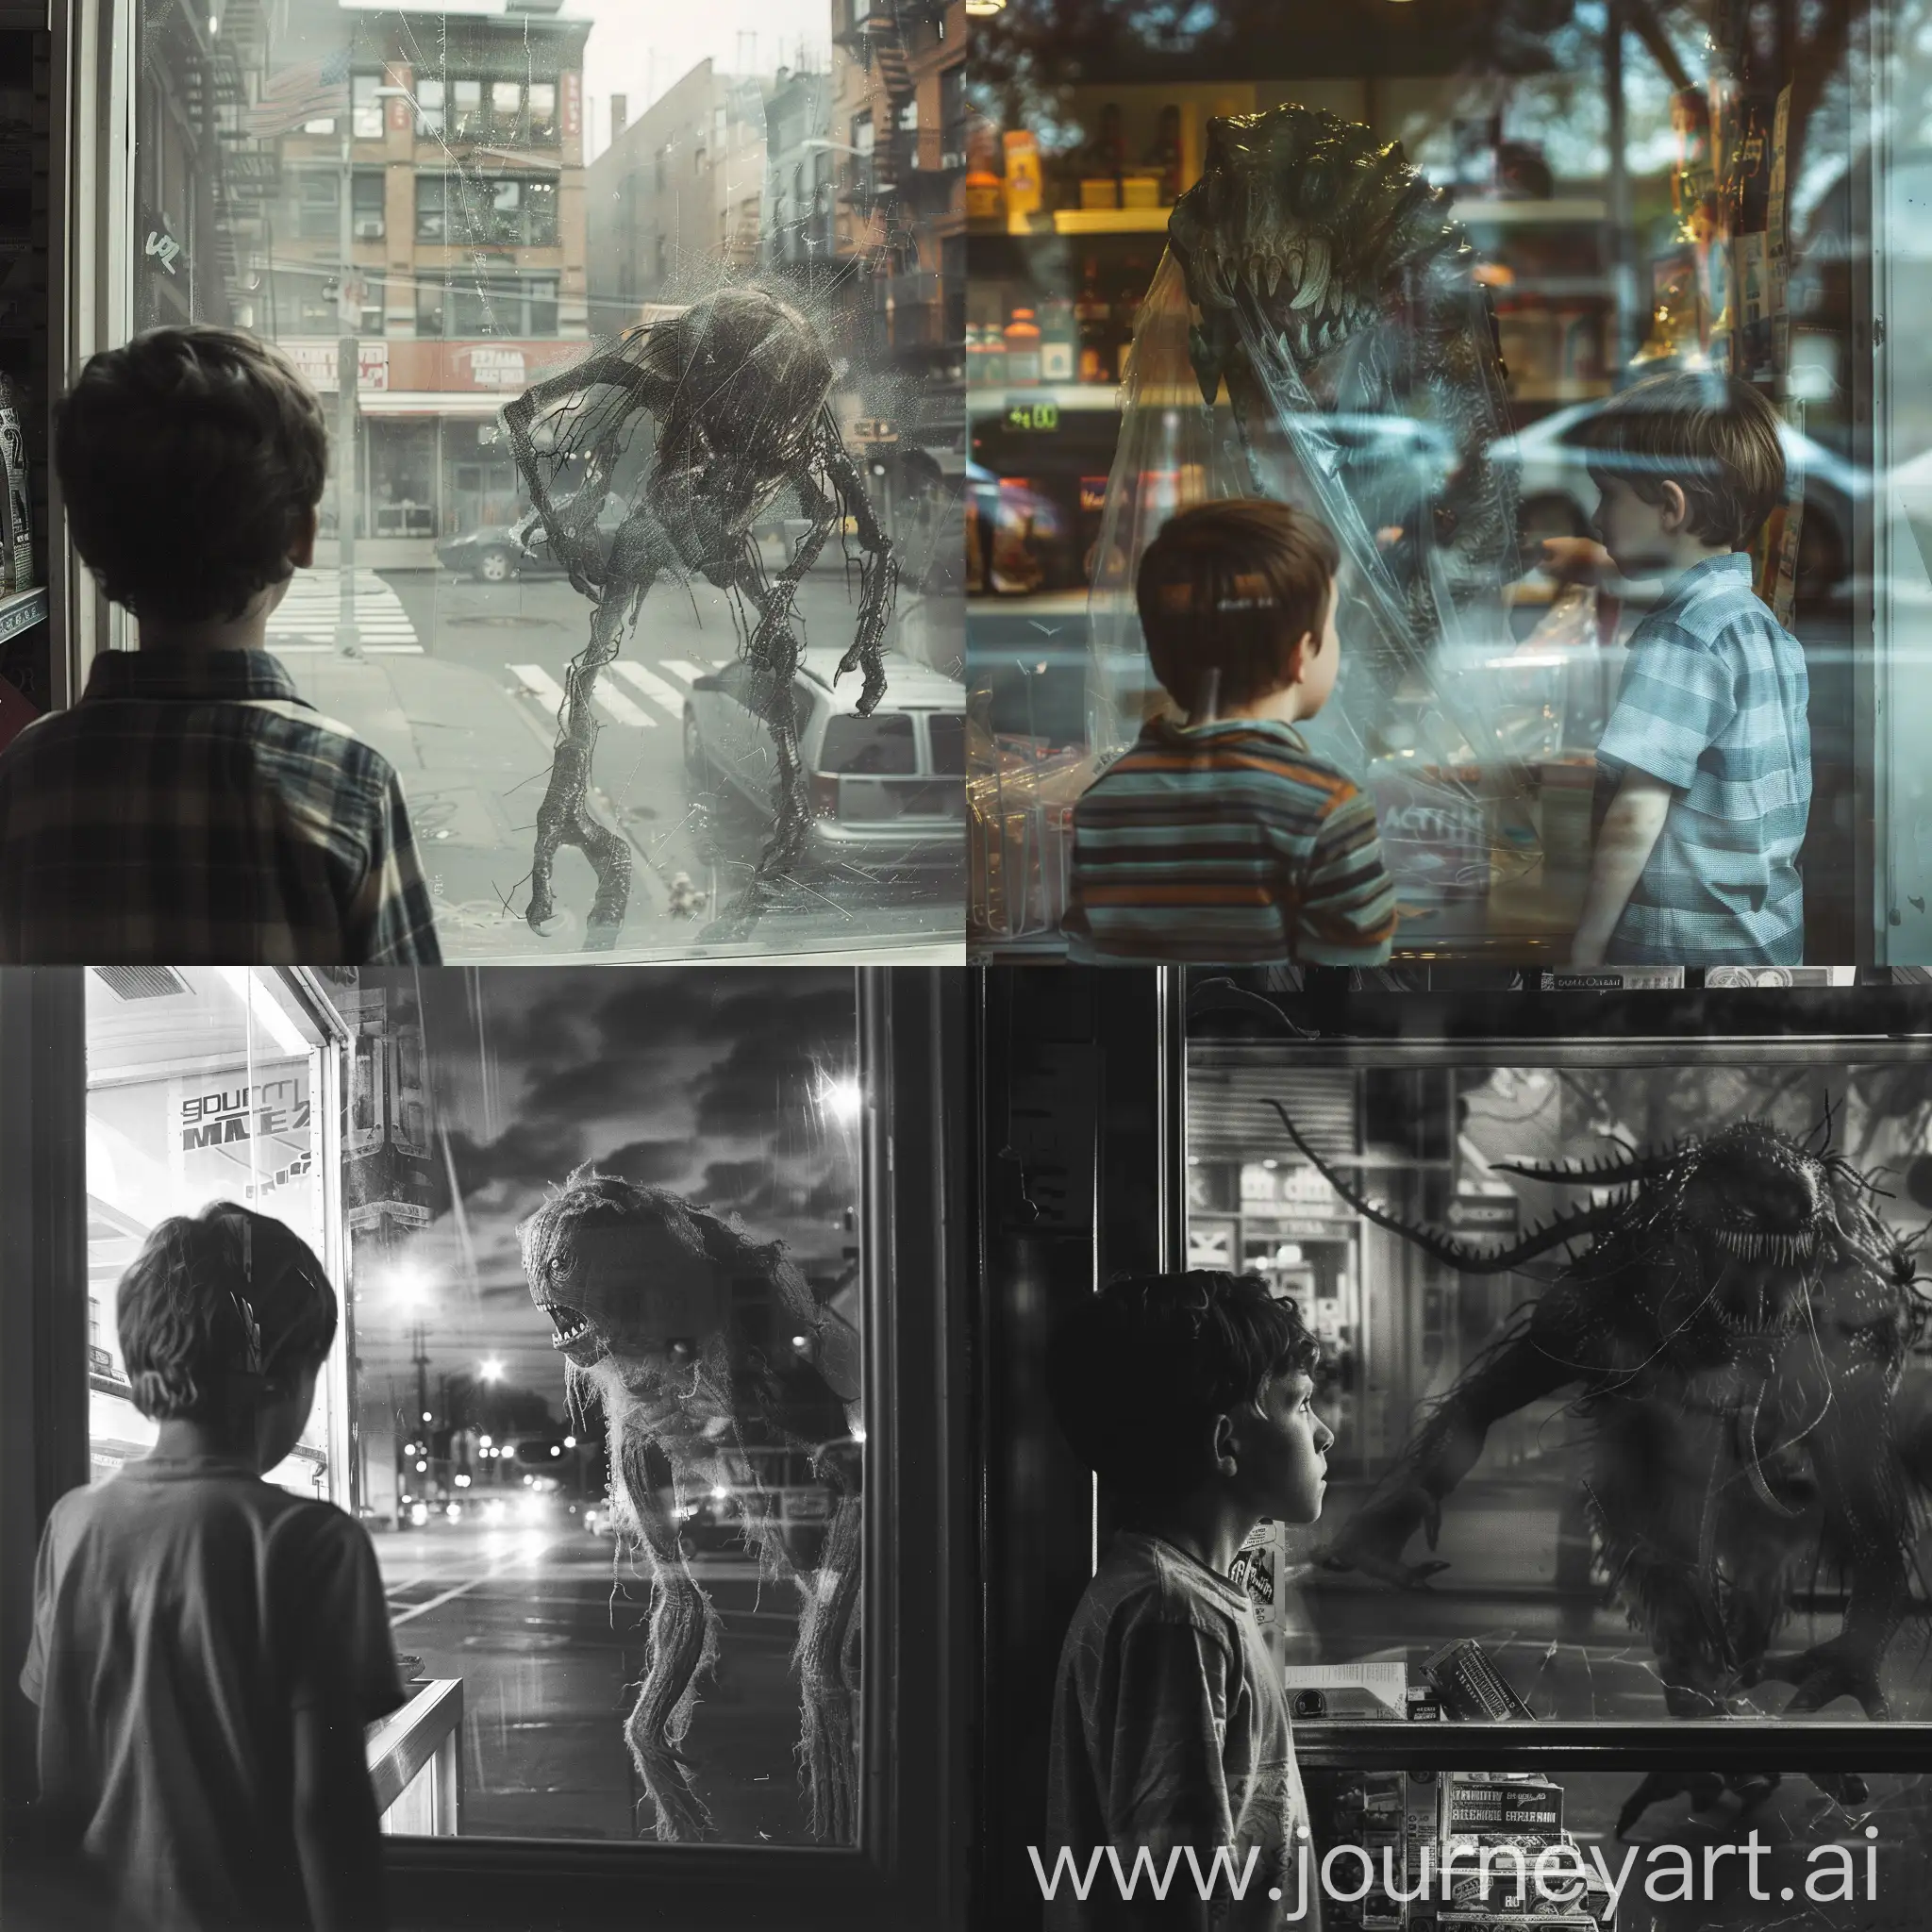 The boy in the store looks at the street through the glass at the creepy creature